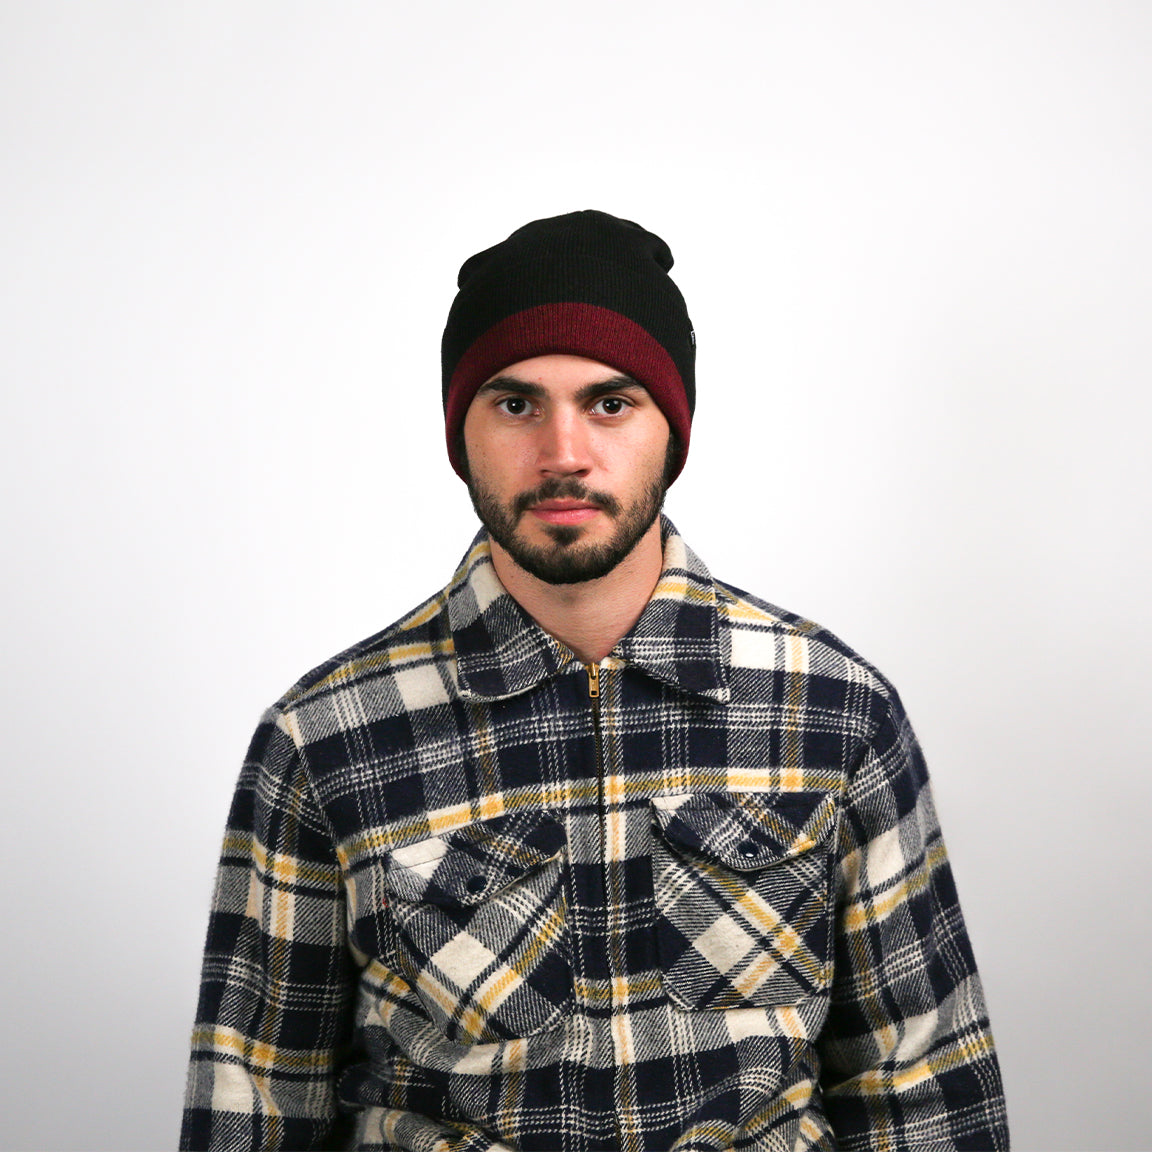 A man with a medium complexion stands directly facing the camera. He has dark eyes, a neatly trimmed beard, and short hair, which is mostly covered by a snug-fitting beanie that is black with a red rim. He's wearing a cozy flannel shirt with a plaid pattern combining navy blue, white, and mustard yellow, featuring buttoned chest pockets.